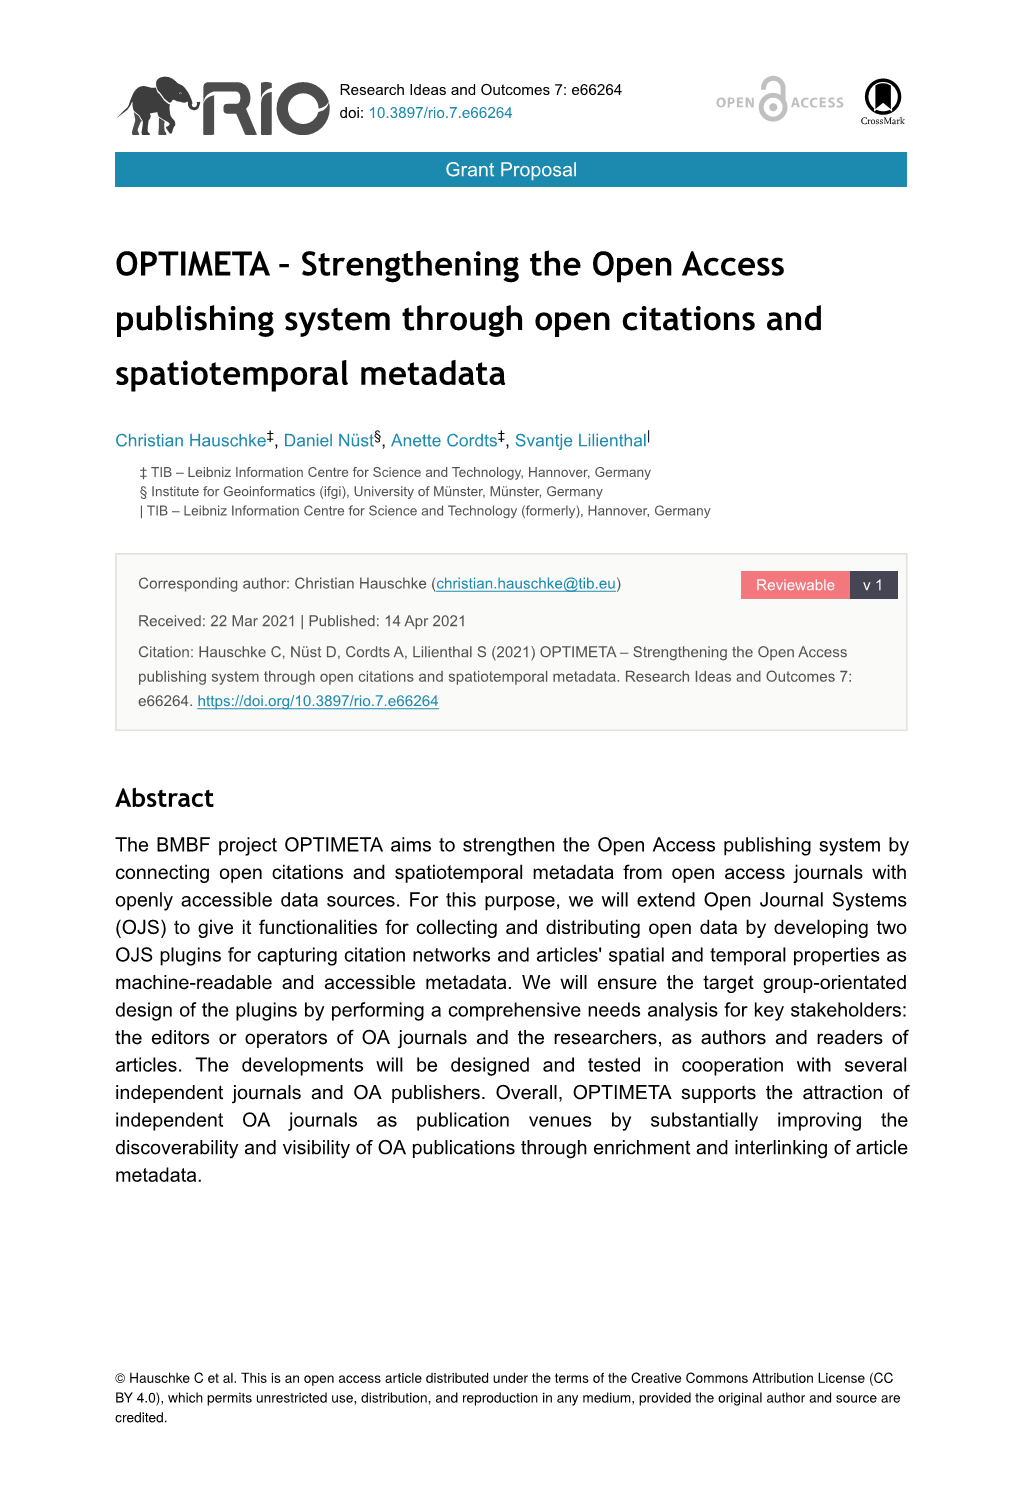 OPTIMETA – Strengthening the Open Access Publishing System Through Open Citations and Spatiotemporal Metadata